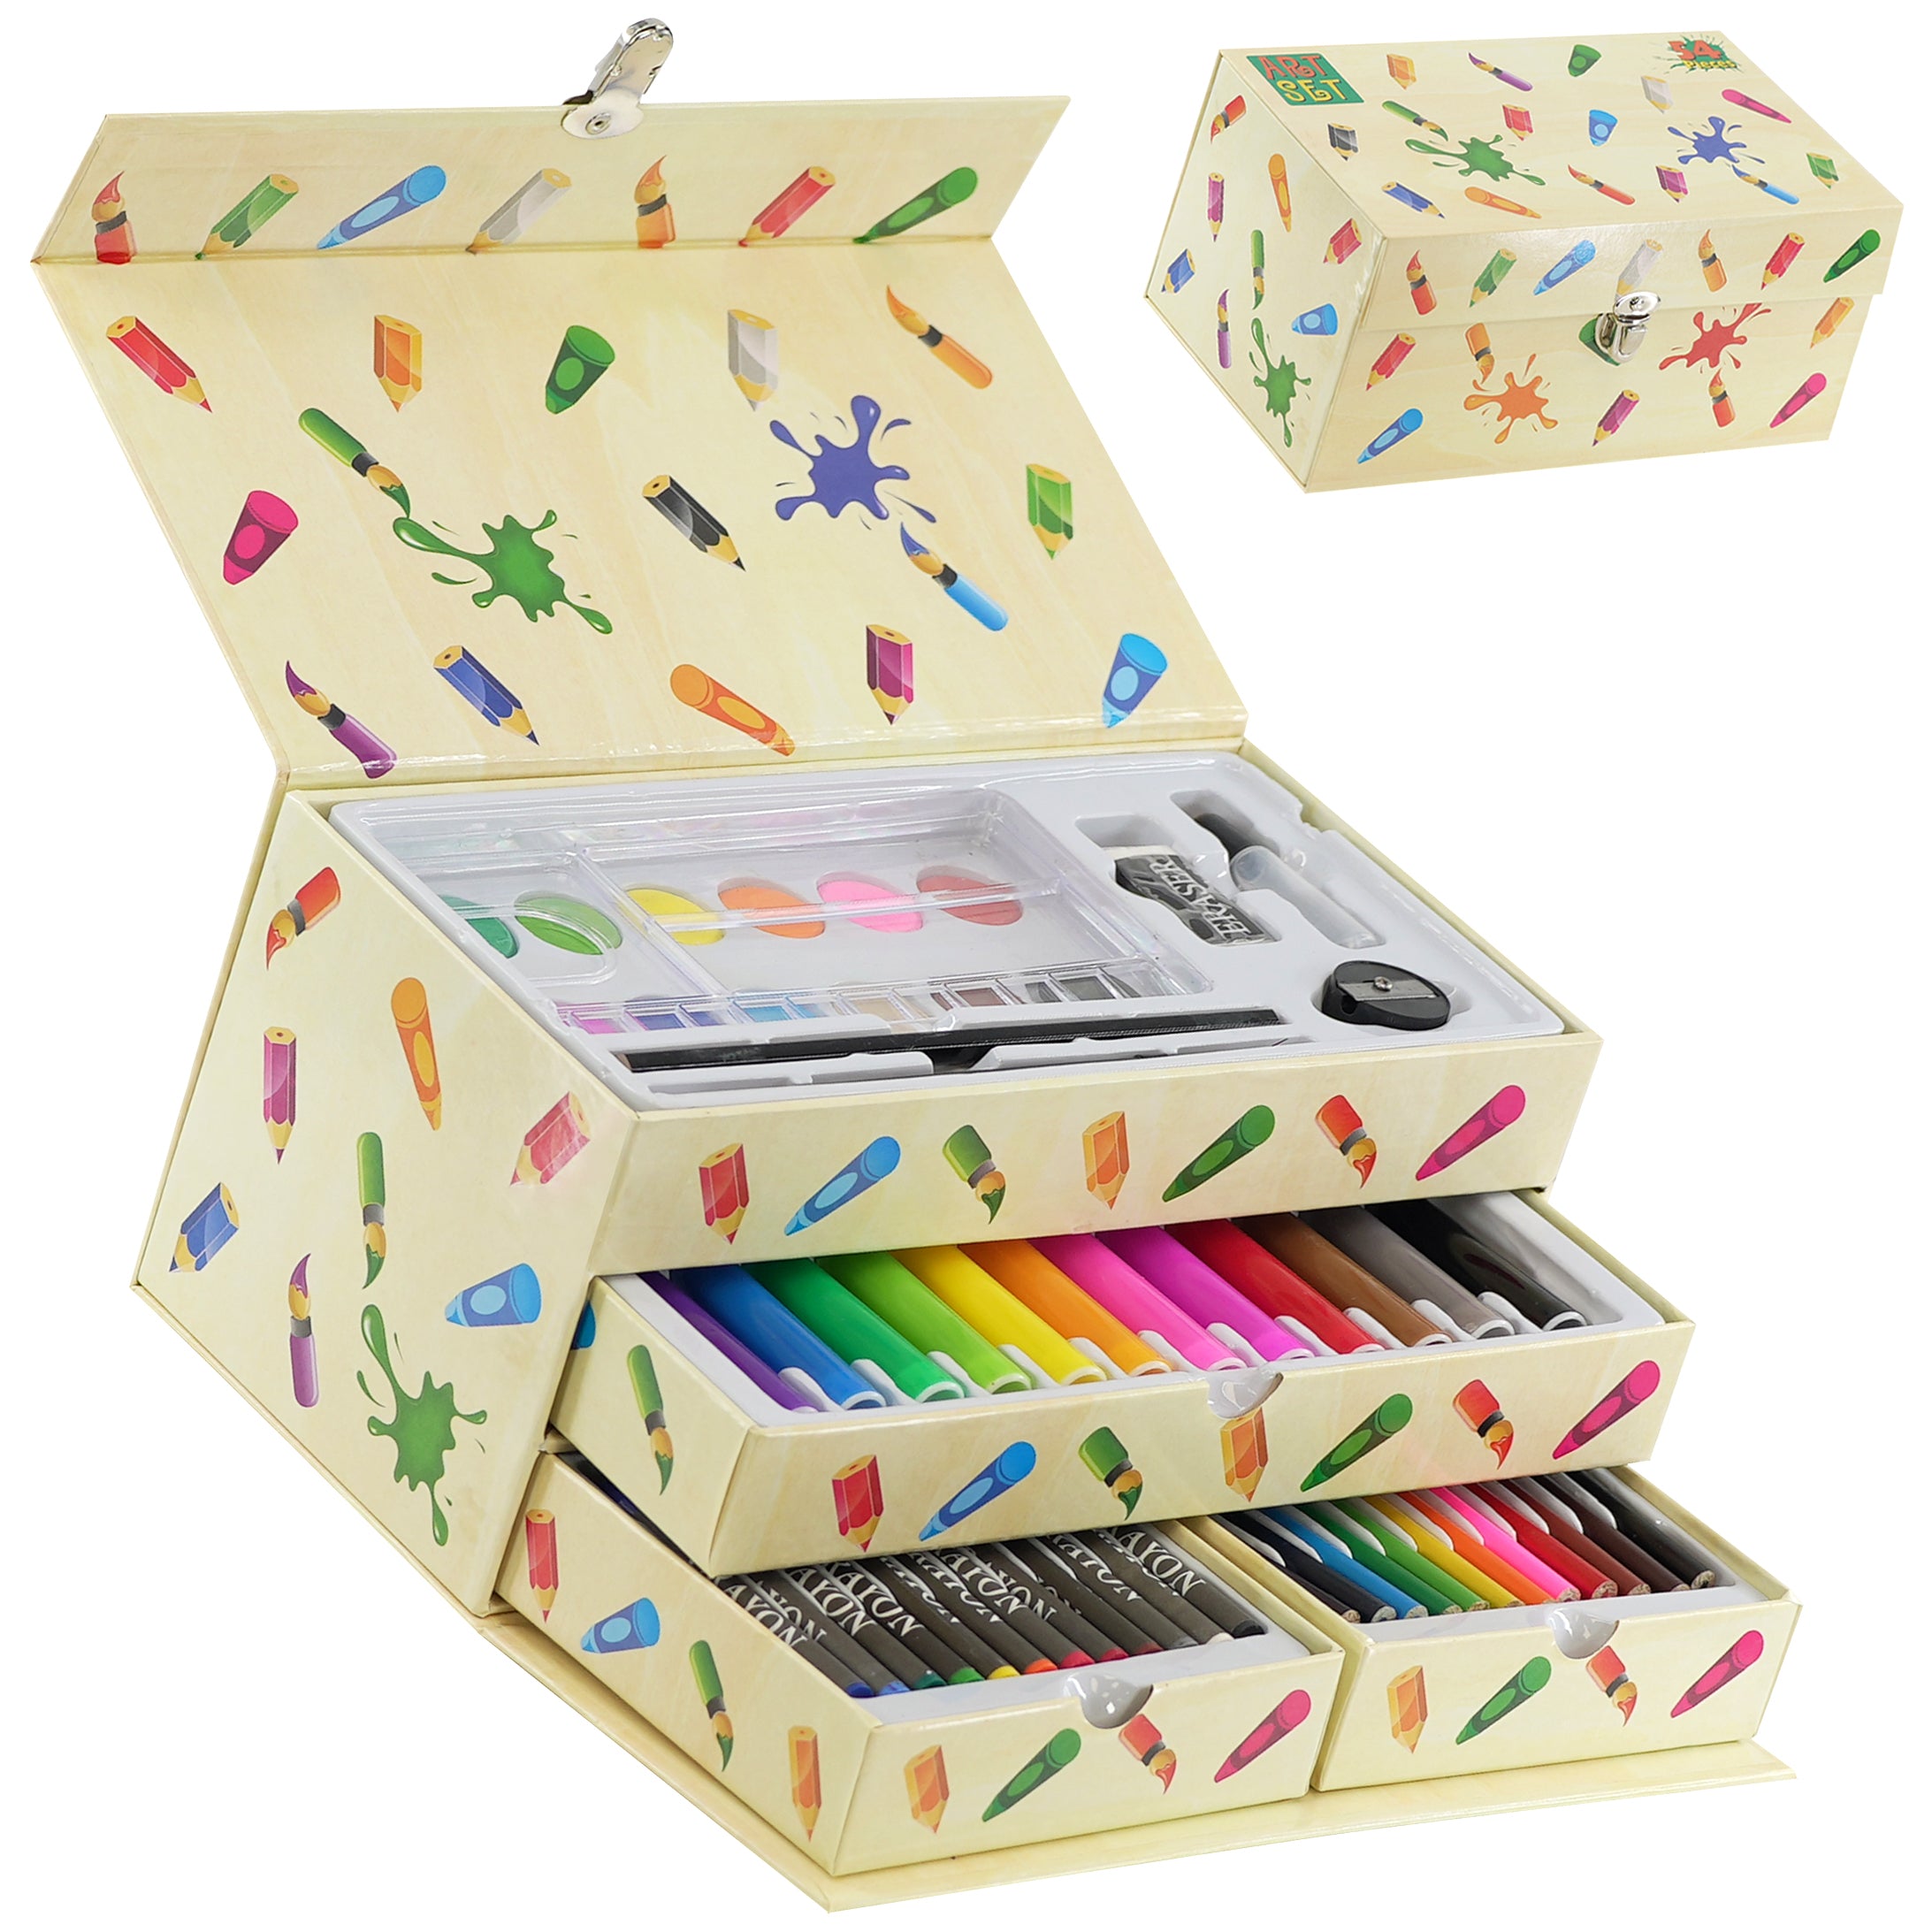 The Magic Toy Shop Drawing 54 Pieces Craft Art Set in A Box